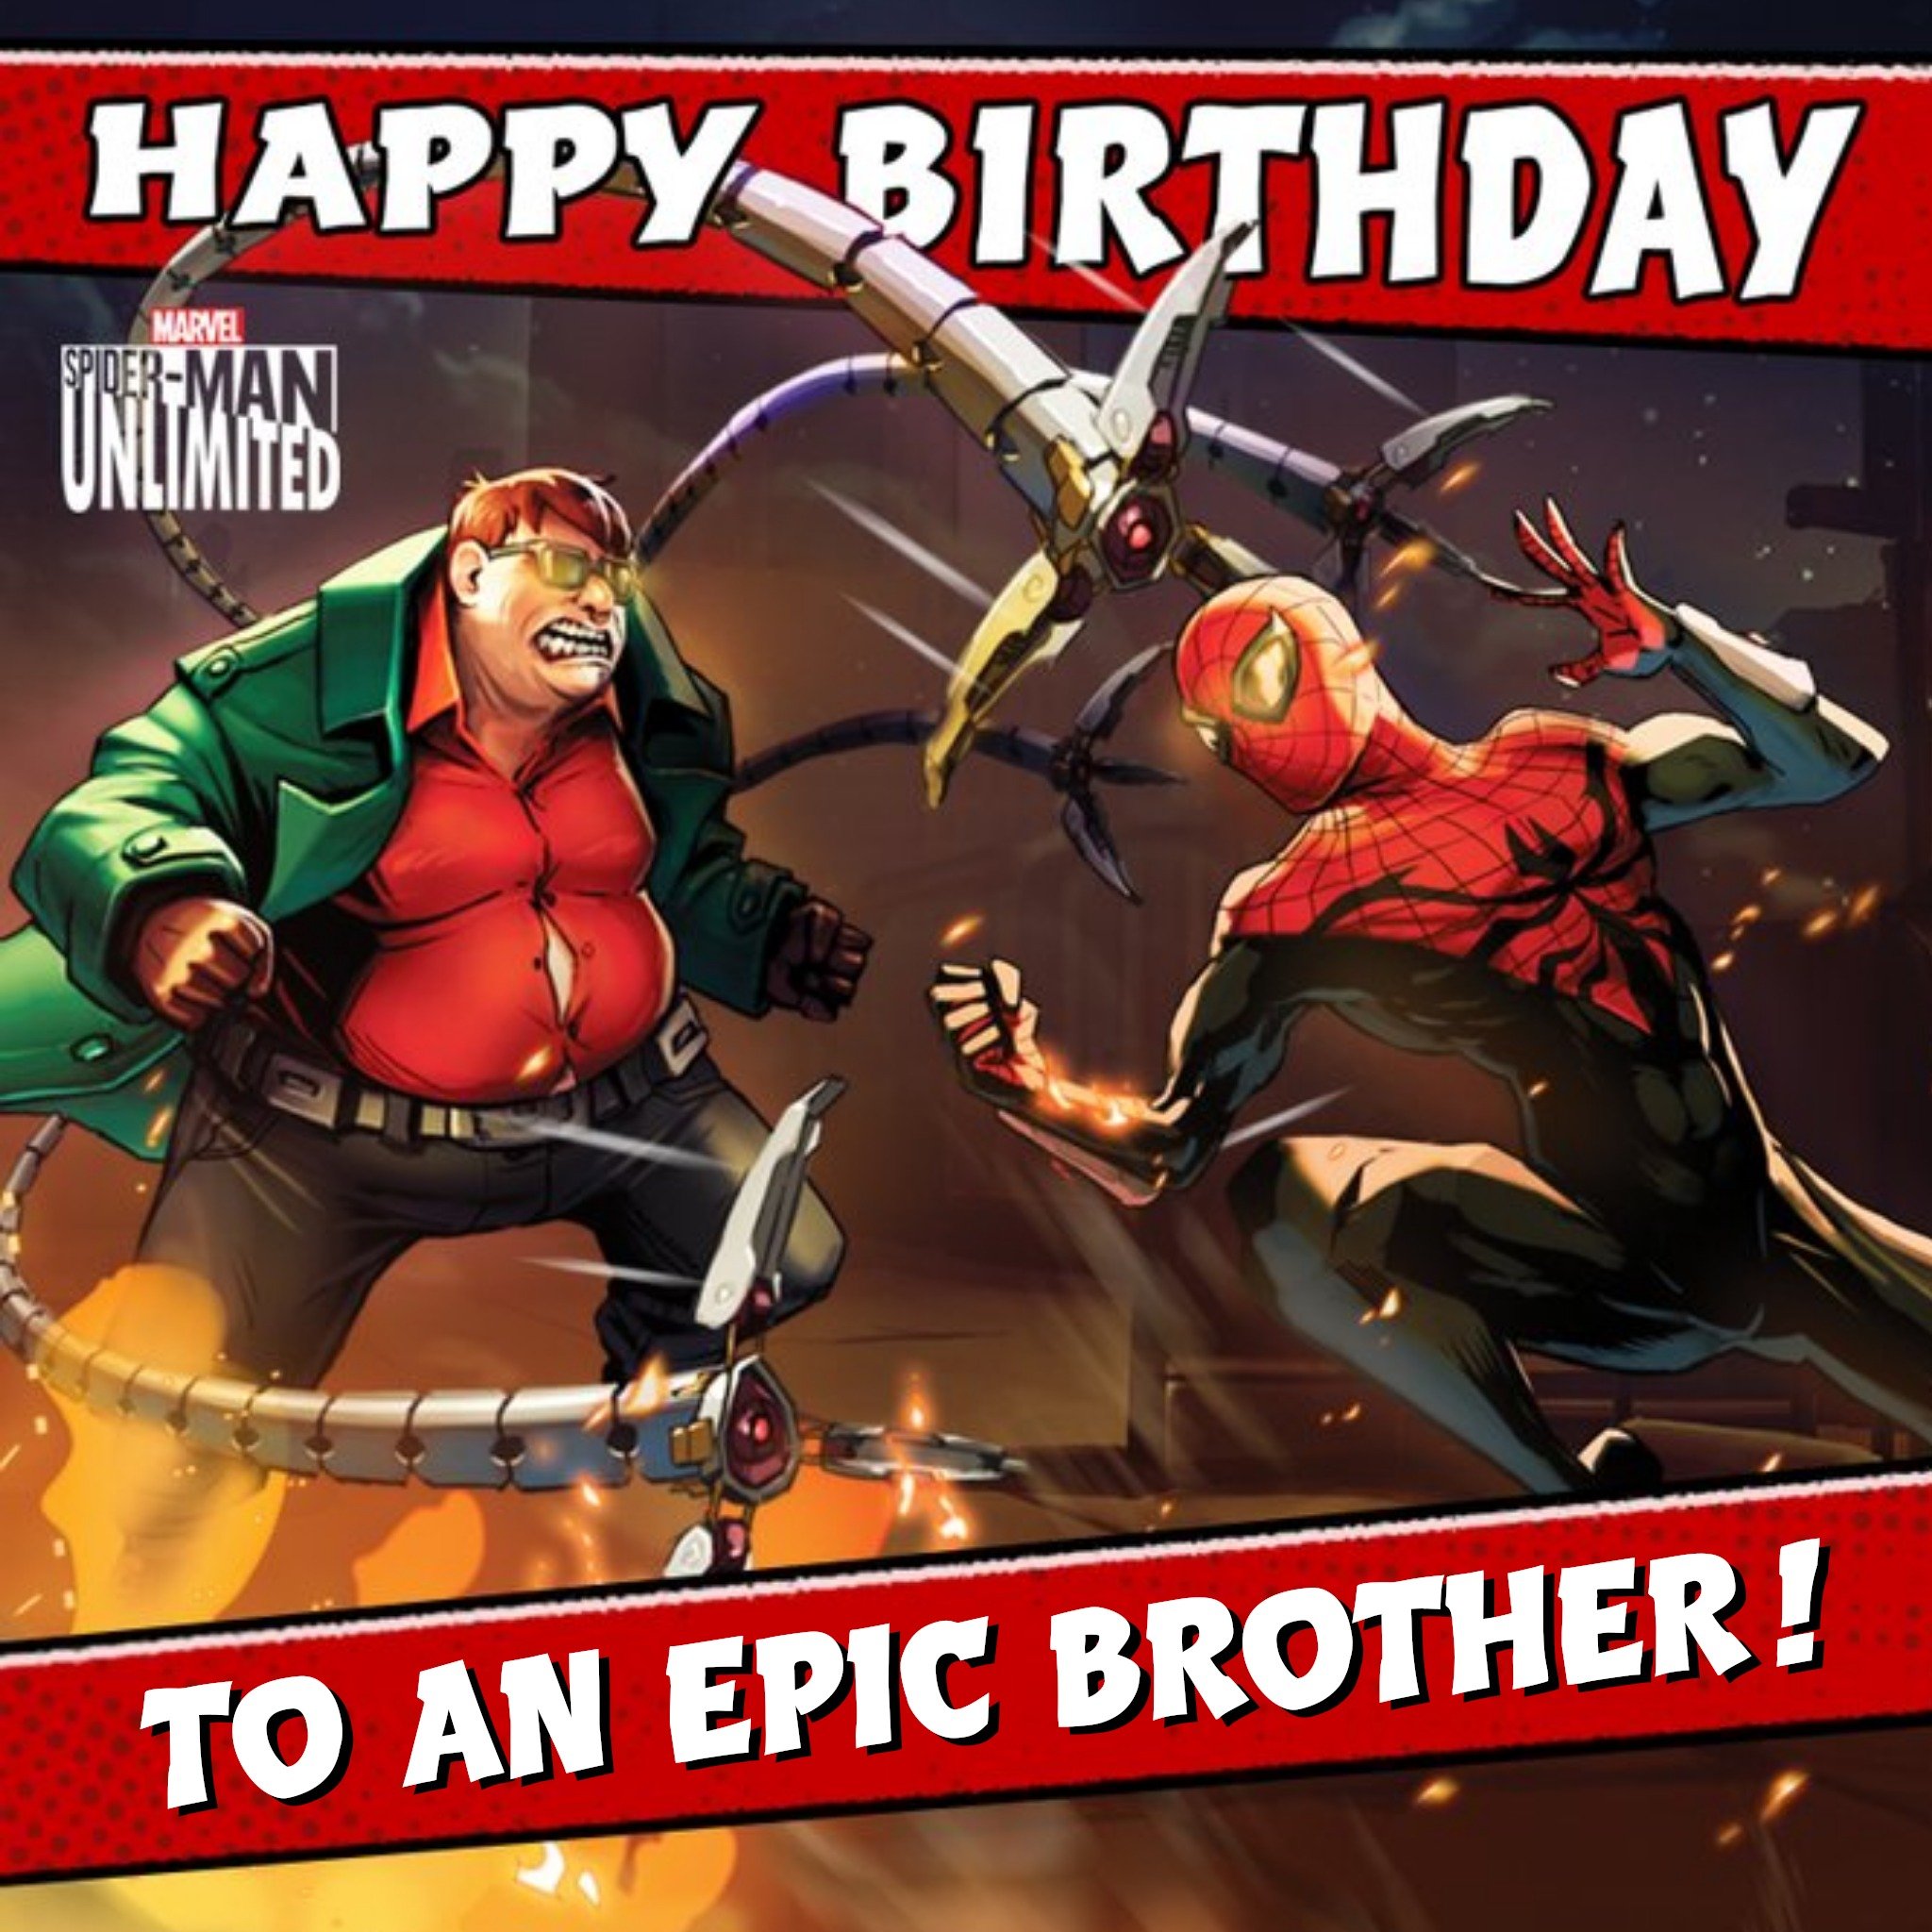 Marvel Spiderman Unlimited Epic Brother Gaming Birthday Card, Large